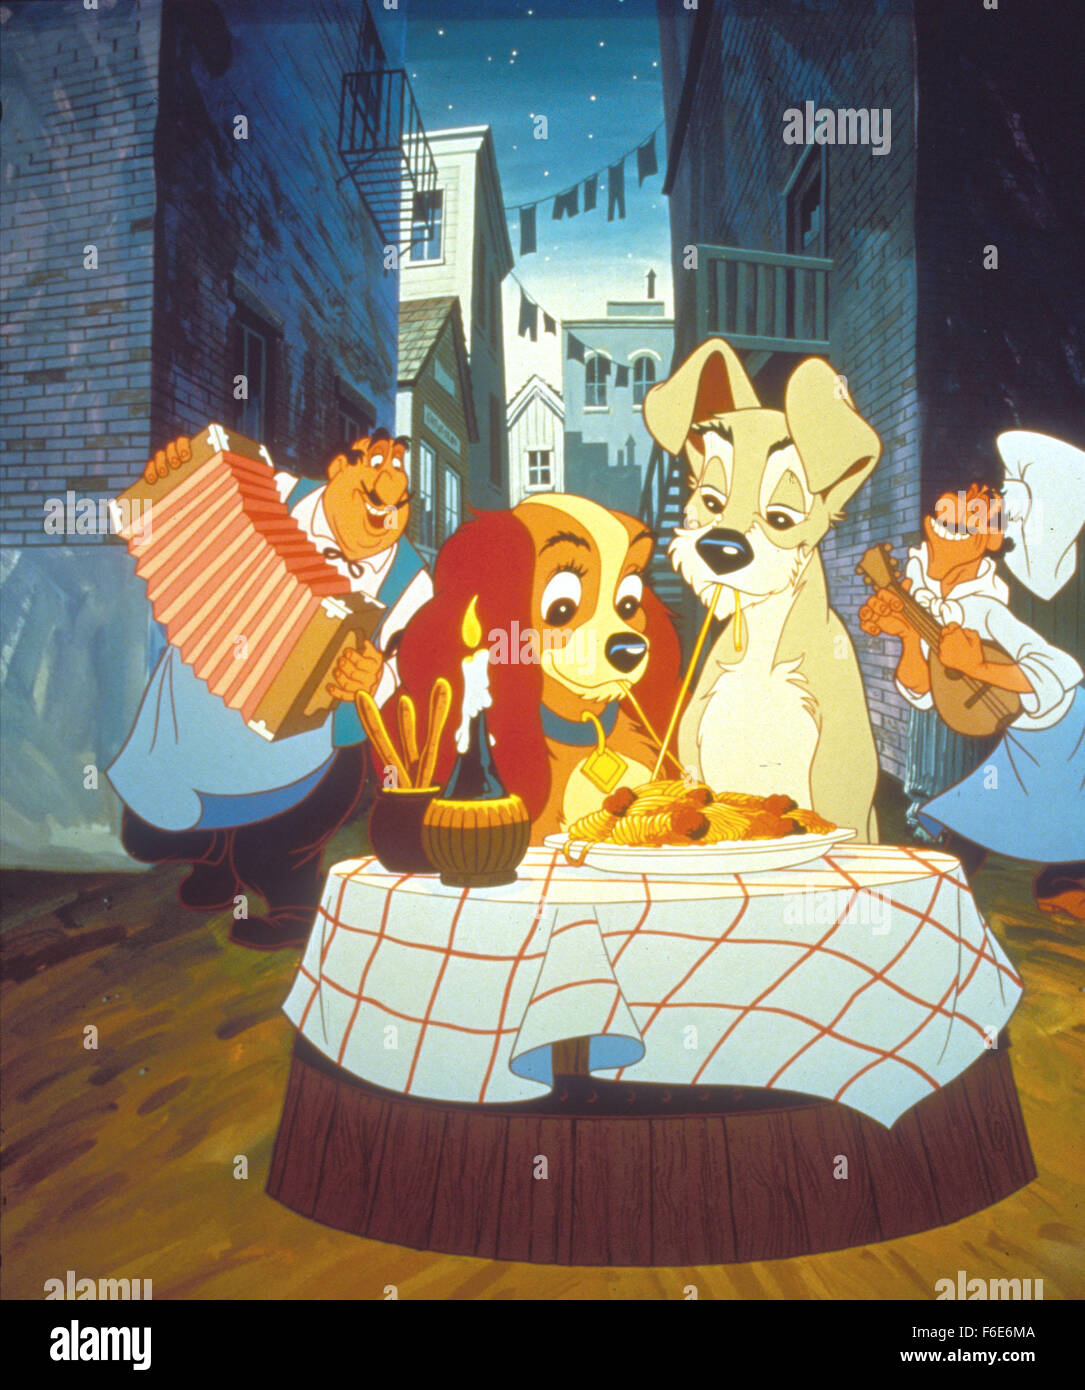 RELEASE DATE: June 1955. MOVIE TITLE: Lady and the Tramp. STUDIO: Walt Disney Productions. PLOT: Lady, a golden cocker spaniel, meets up with a mongrel dog who calls himself the Tramp. He is obviously from the wrong side of town, but happenings at Lady's home make her decide to travel with him for a while. This turns out to be a bad move, as no dog is above the law. Stock Photo